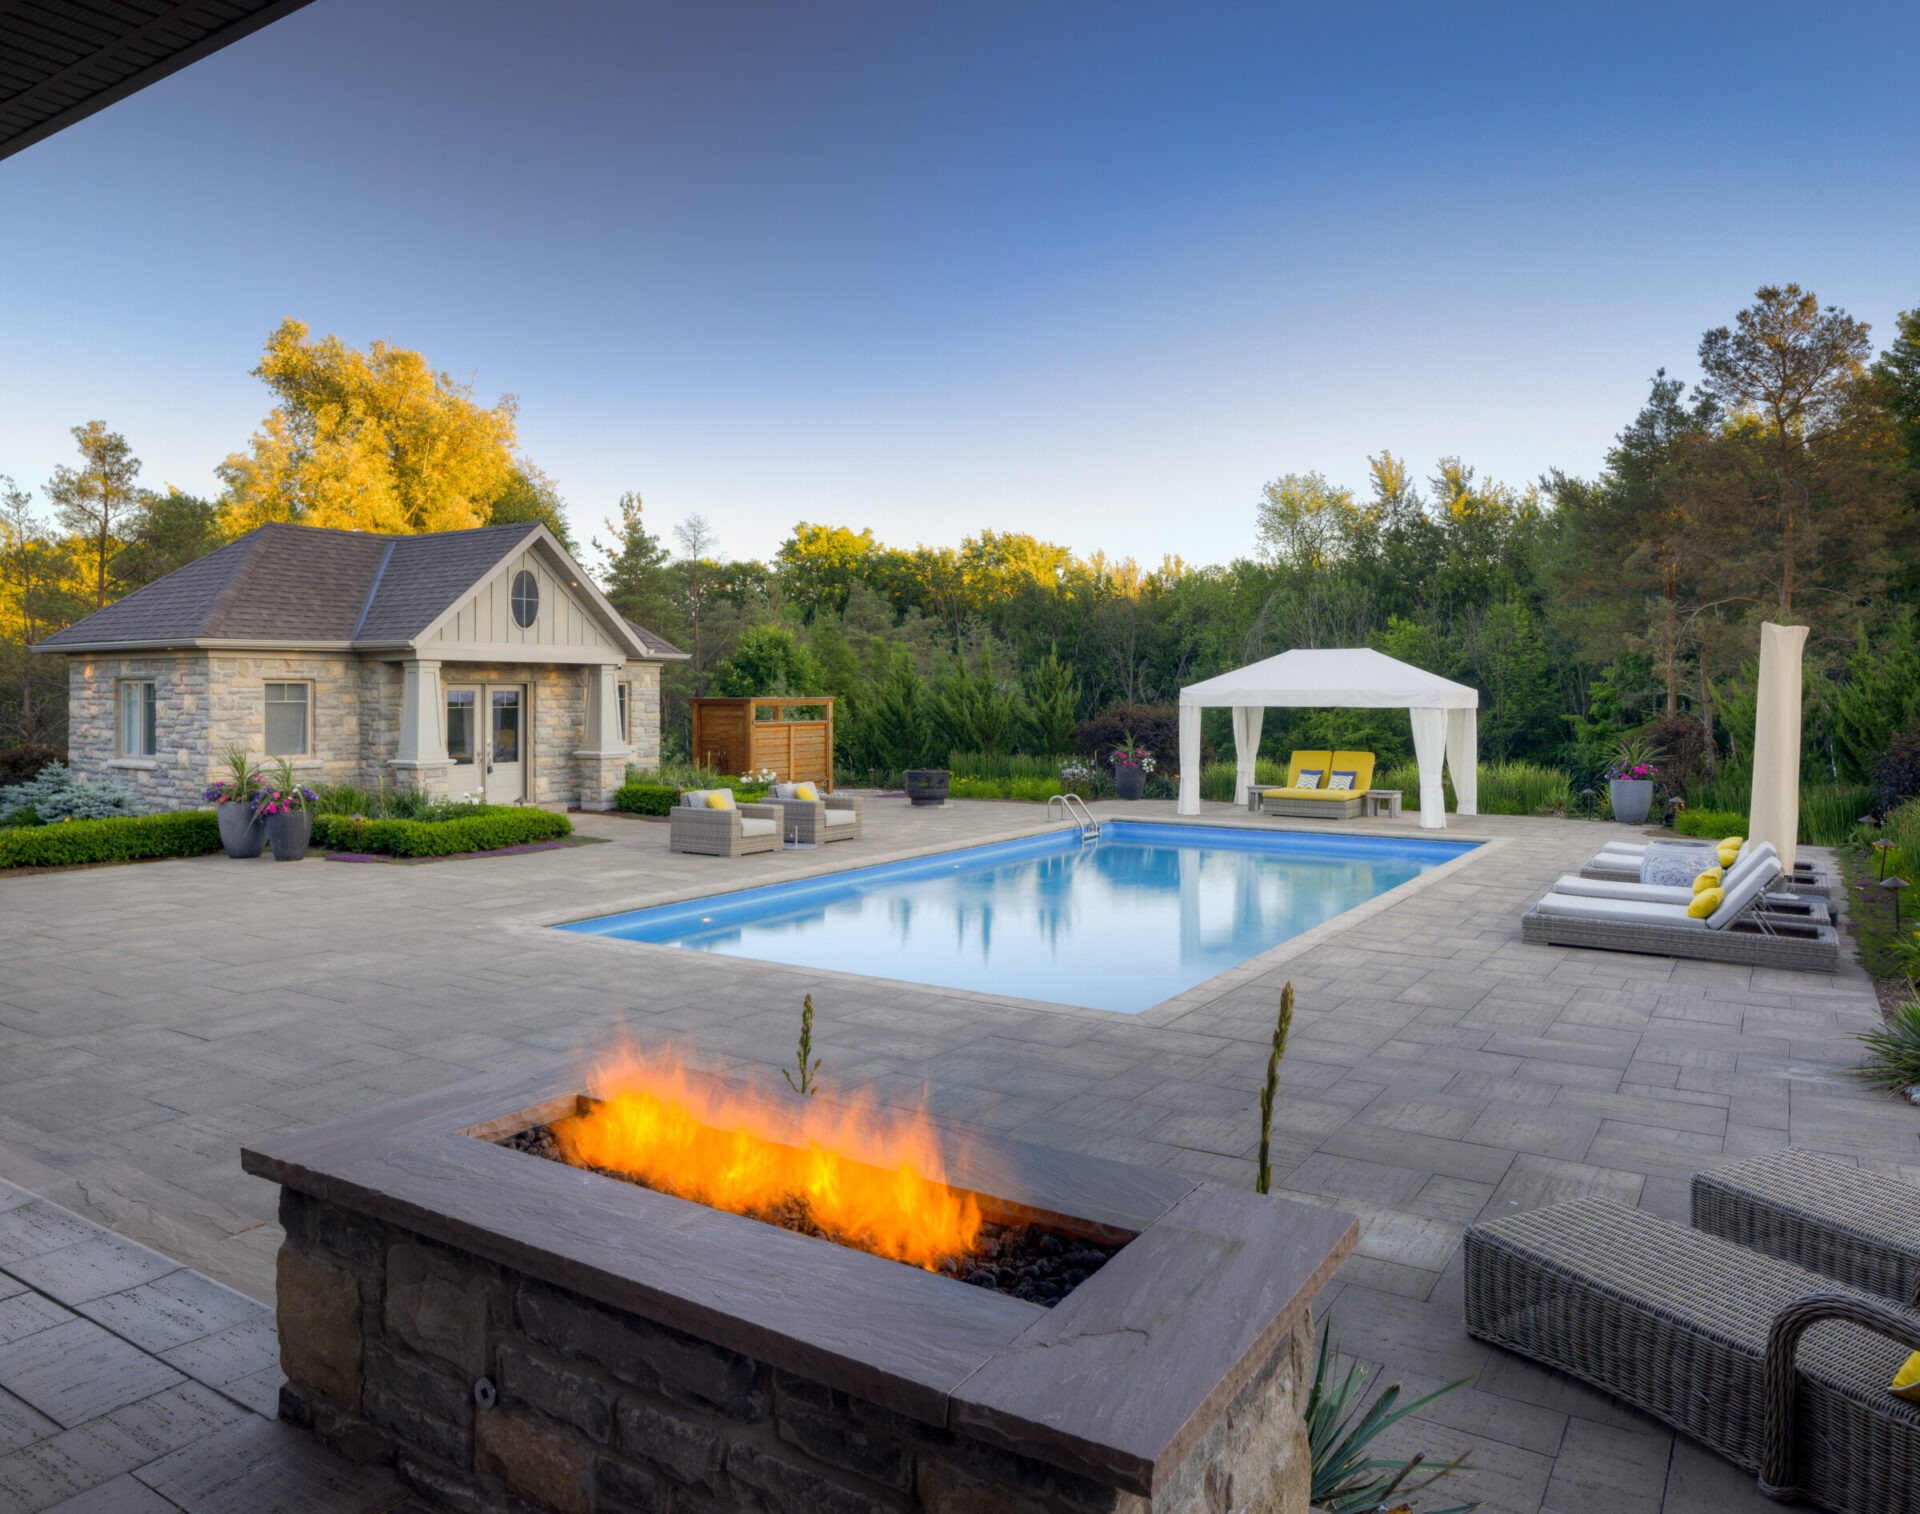 A luxurious backyard with an in-ground pool, elegant stone house, outdoor seating, a fire pit, and lush greenery under a clear, twilight sky.